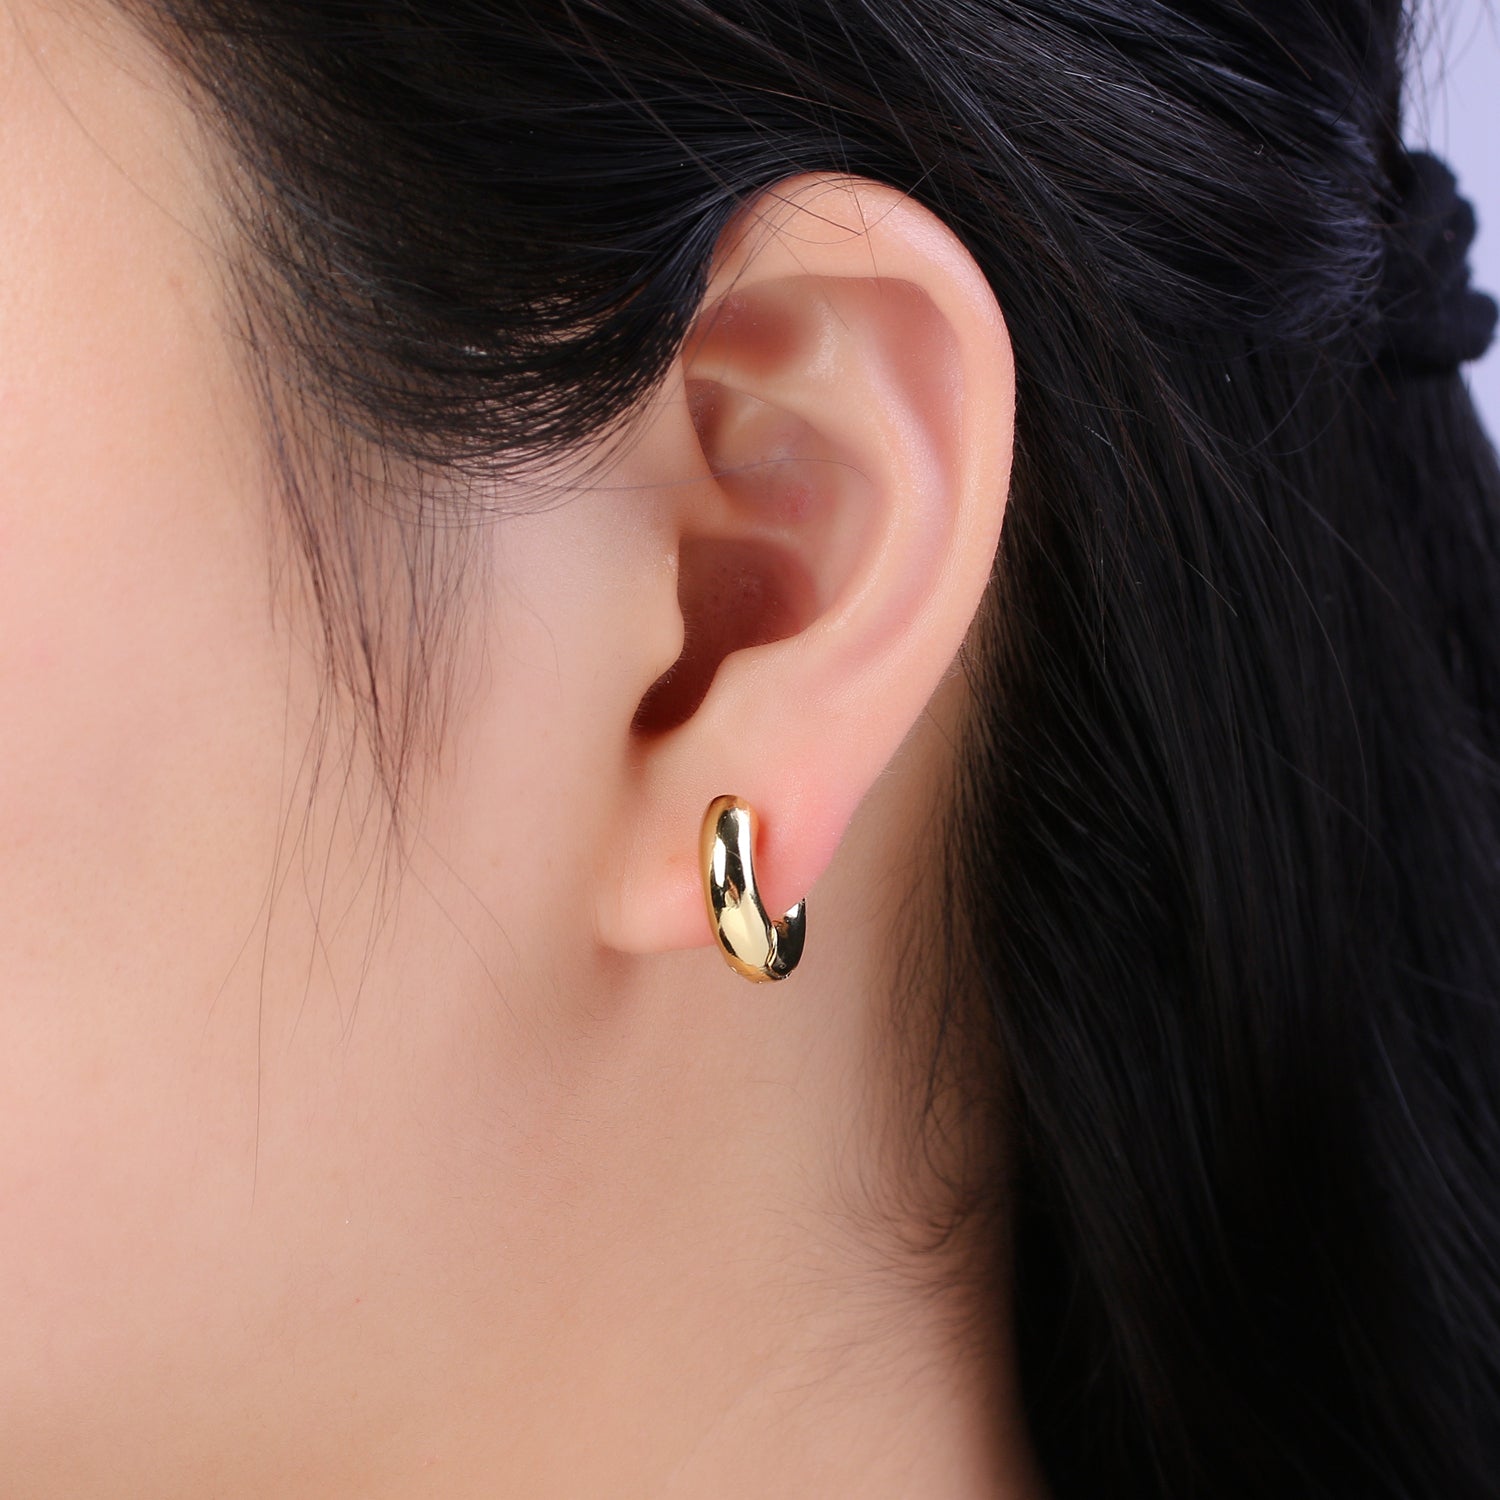 Minimalist Earring Gold Hoop Earrings • Perfect Simple Earrings For Her • Gifts for Her T-363 - DLUXCA